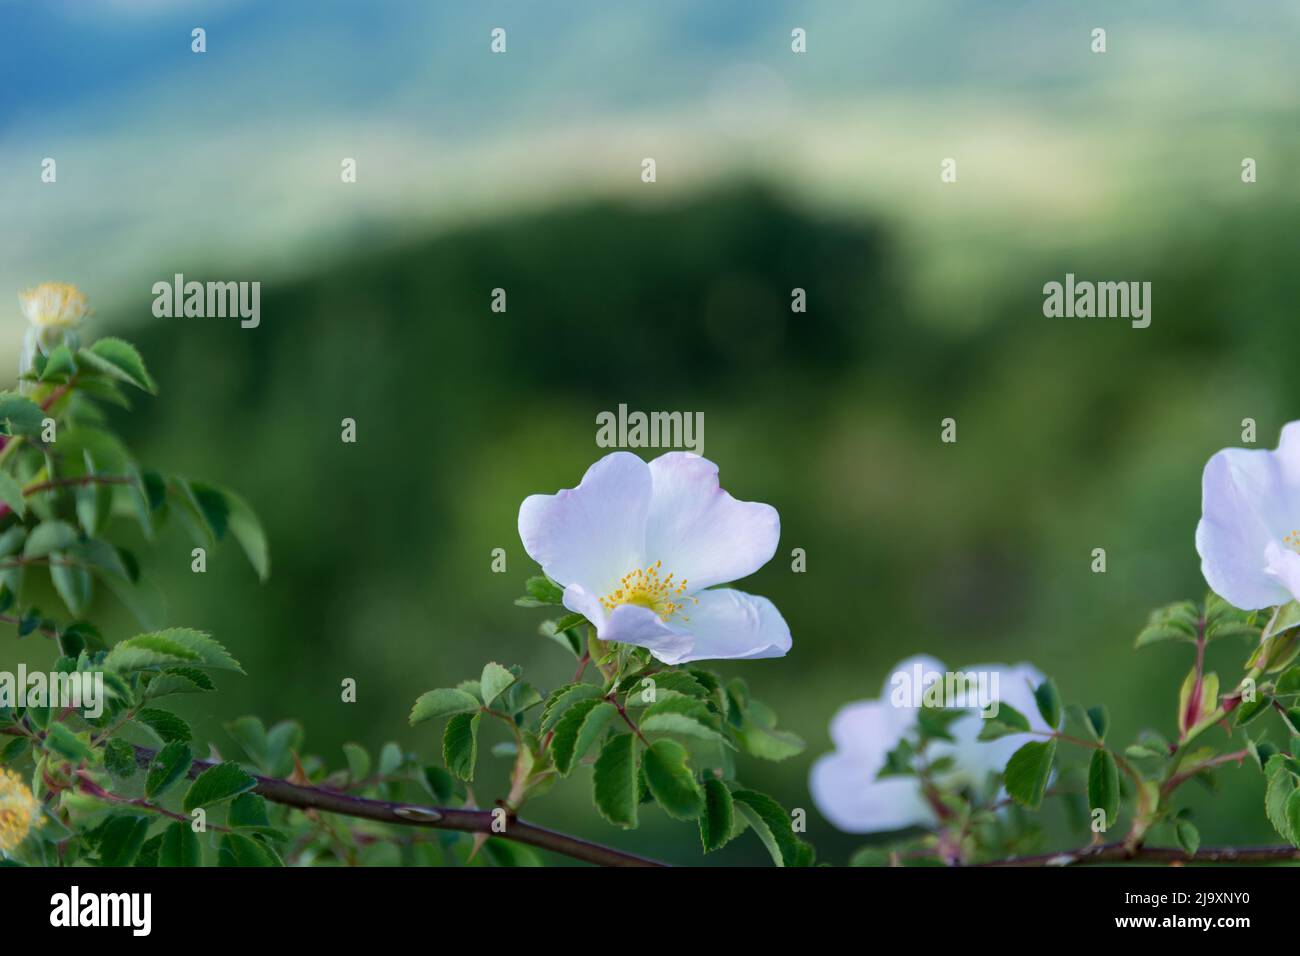 White flowers of dog roses or rosehip against the blurred background of green leaves and sky on a spring day in nature. Free space for text Stock Photo